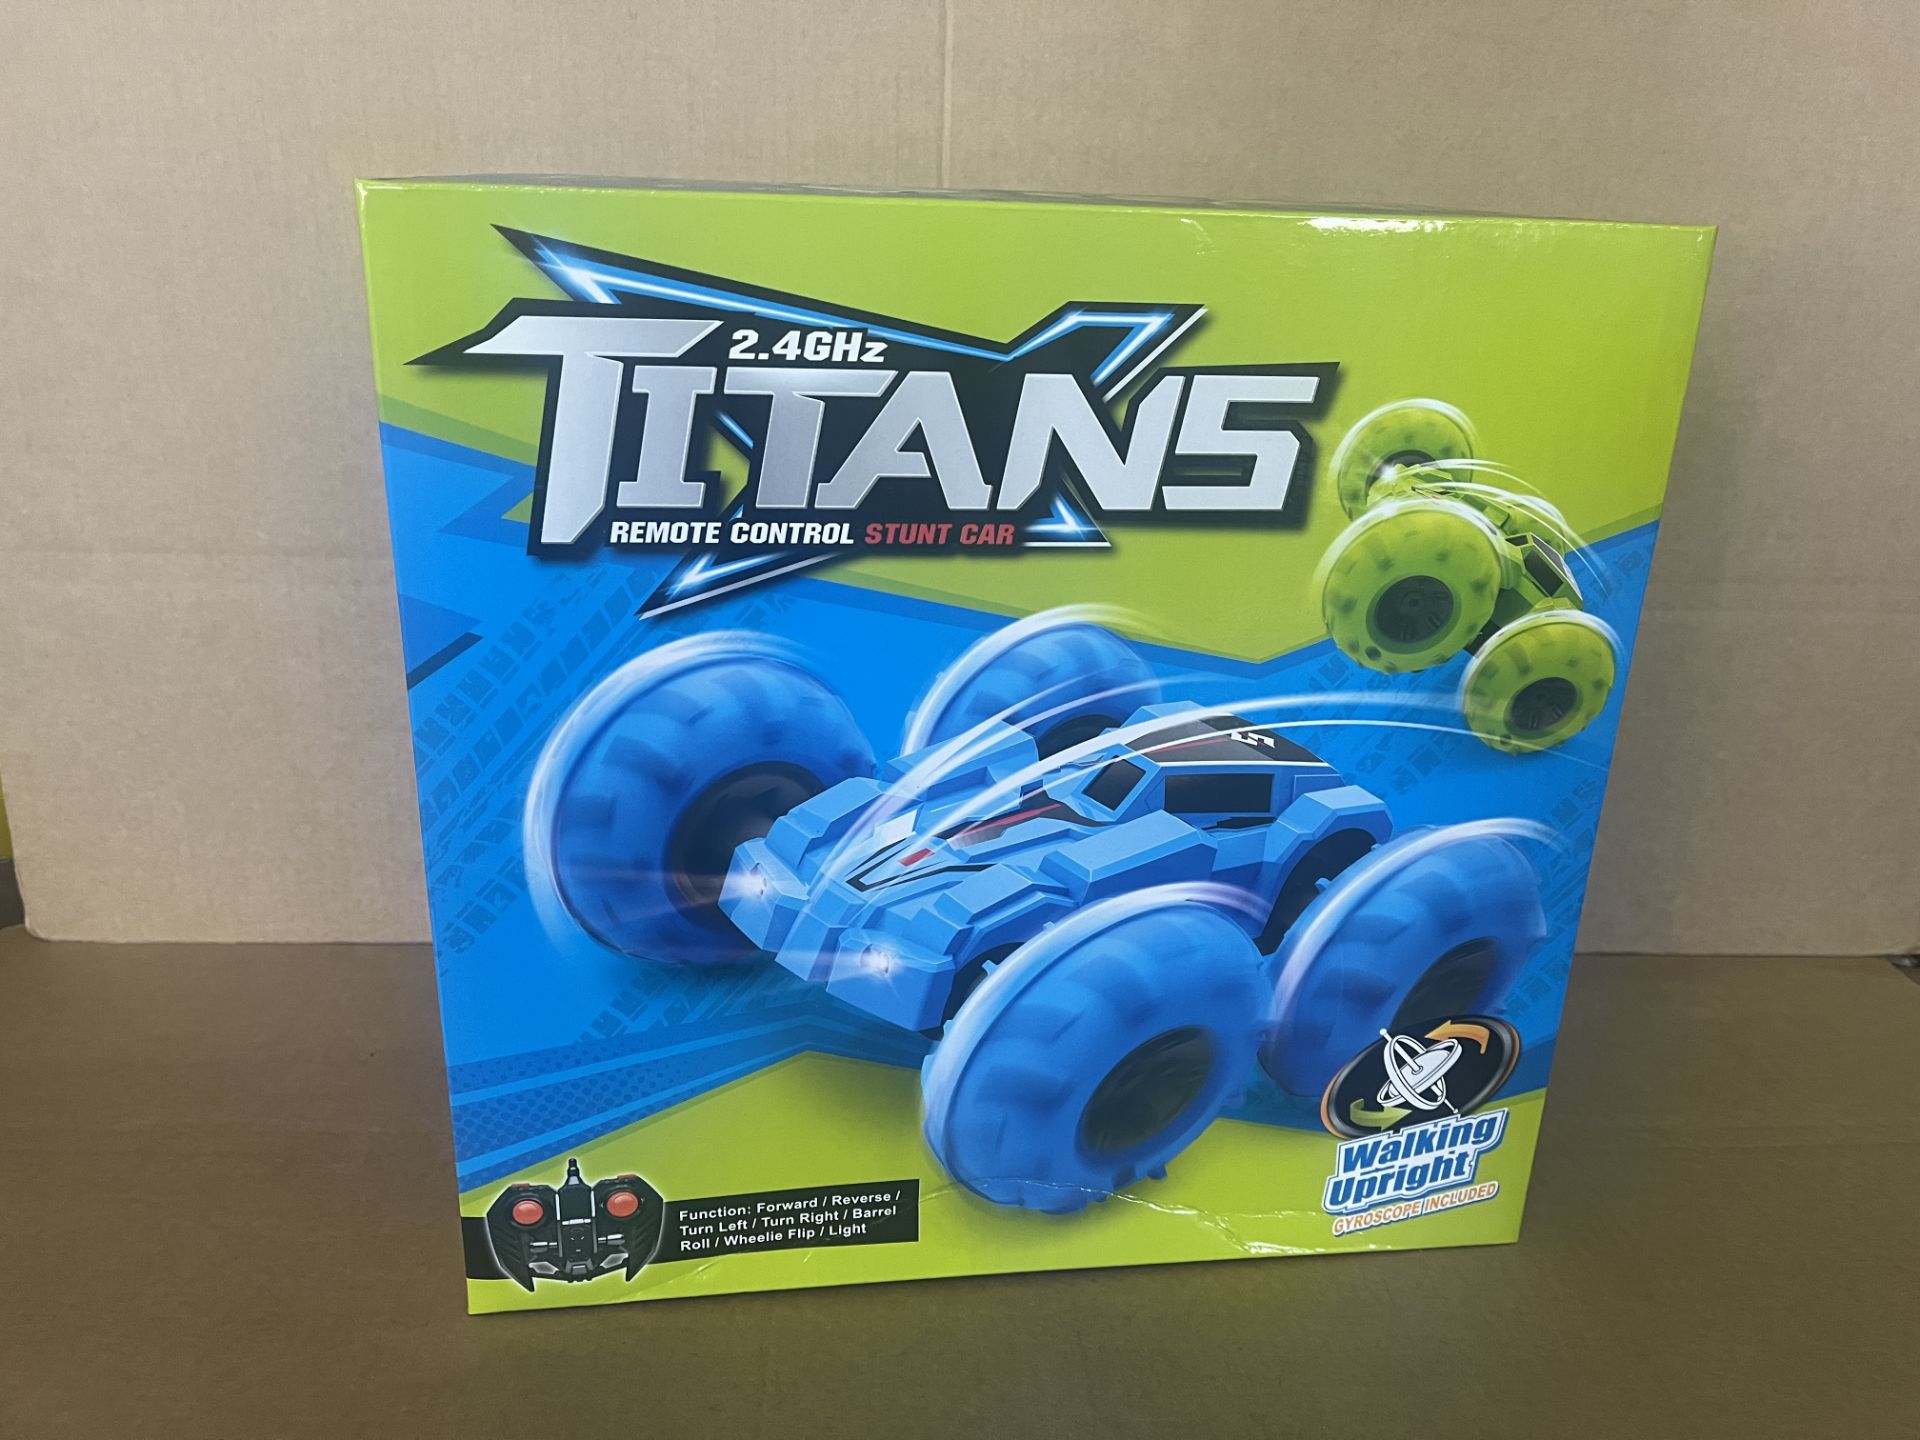 8 X BRAND NEW TITANS 2.4GHZ REMOTE CONTROL STUNT CAR WITH WALKING UPRIGHT, GYROSCOPE INCLUDED R15